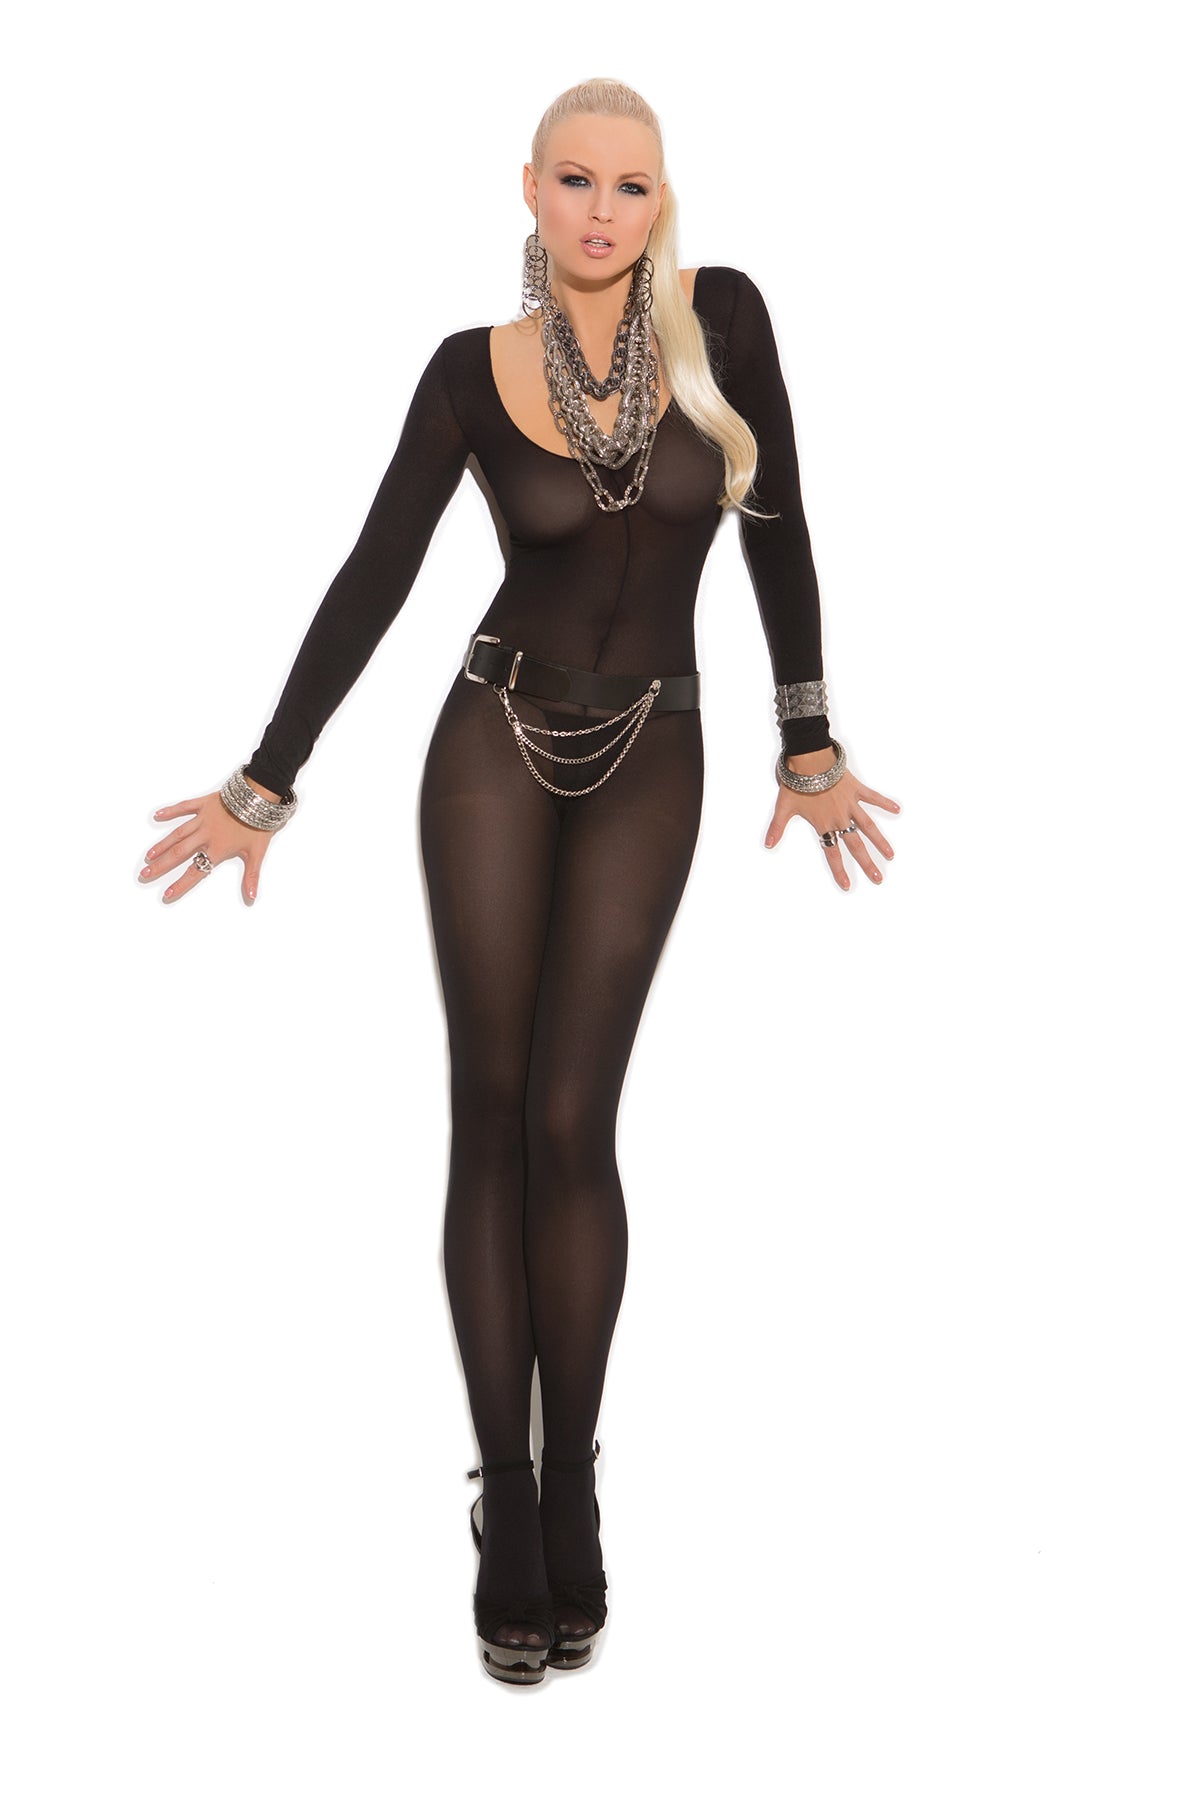 Form-fitting, black opaque long sleeve bodystocking made from comfortable mesh fabric. Features long sleeves and an open crotch. Model standing confidently. Also available in white and nude. 